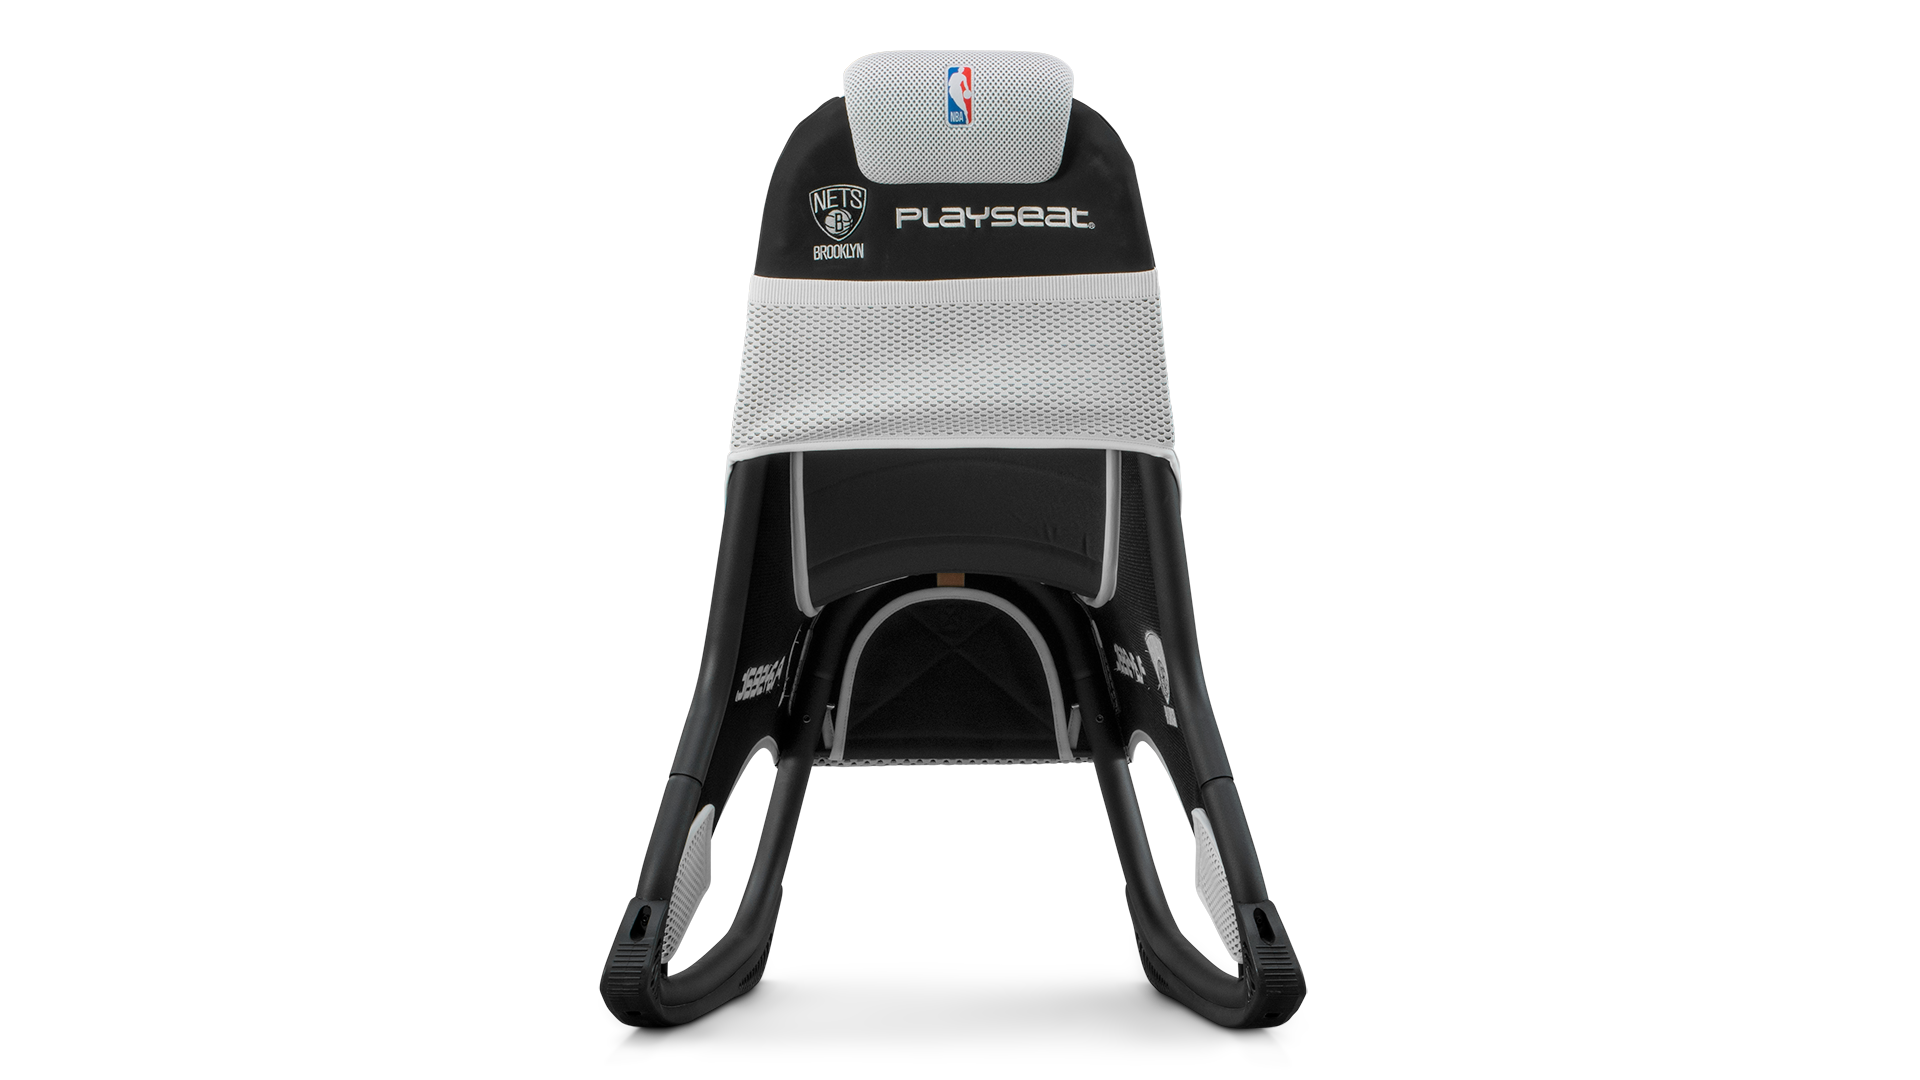 playseat-go-nba-brooklyn-nets-gaming-seat-back-view-1920x1080-1.png